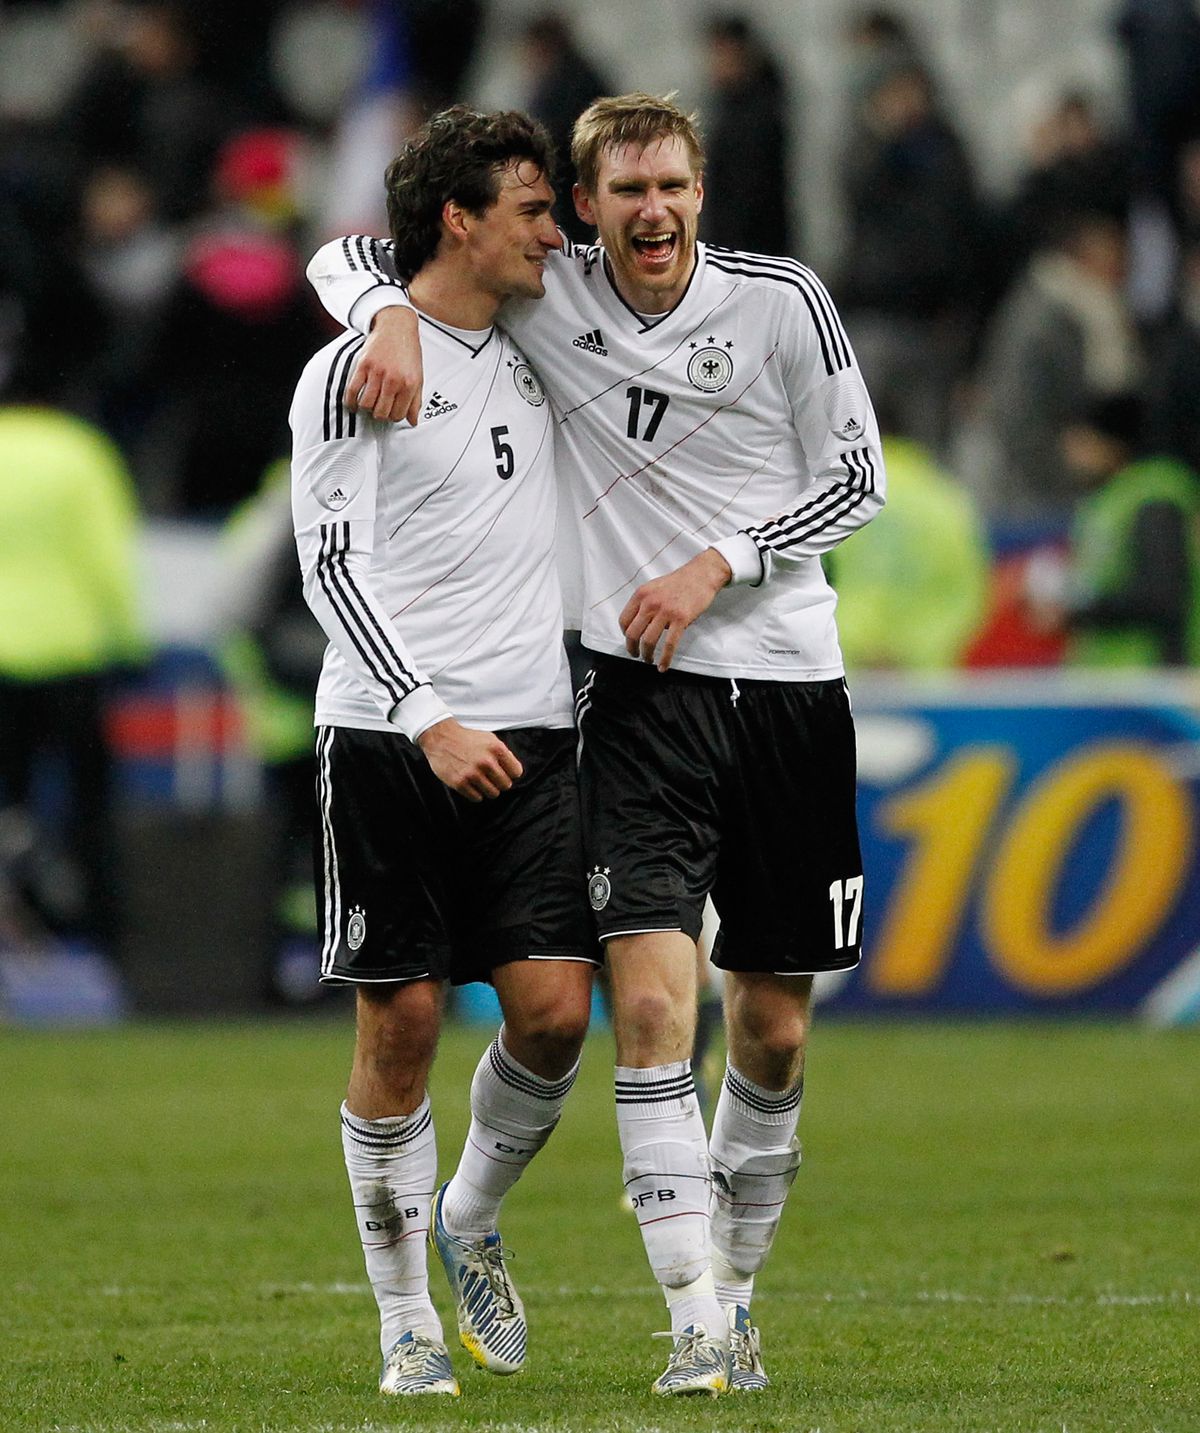 France v Germany - International Friendly
PARIS, FRANCE - FEBRUARY 06: Mats Hummels (L) and Per Mertesacker of Germany react after winning the international friendly match between France and Germany at Stade de France on February 6, 2013 in Paris, France